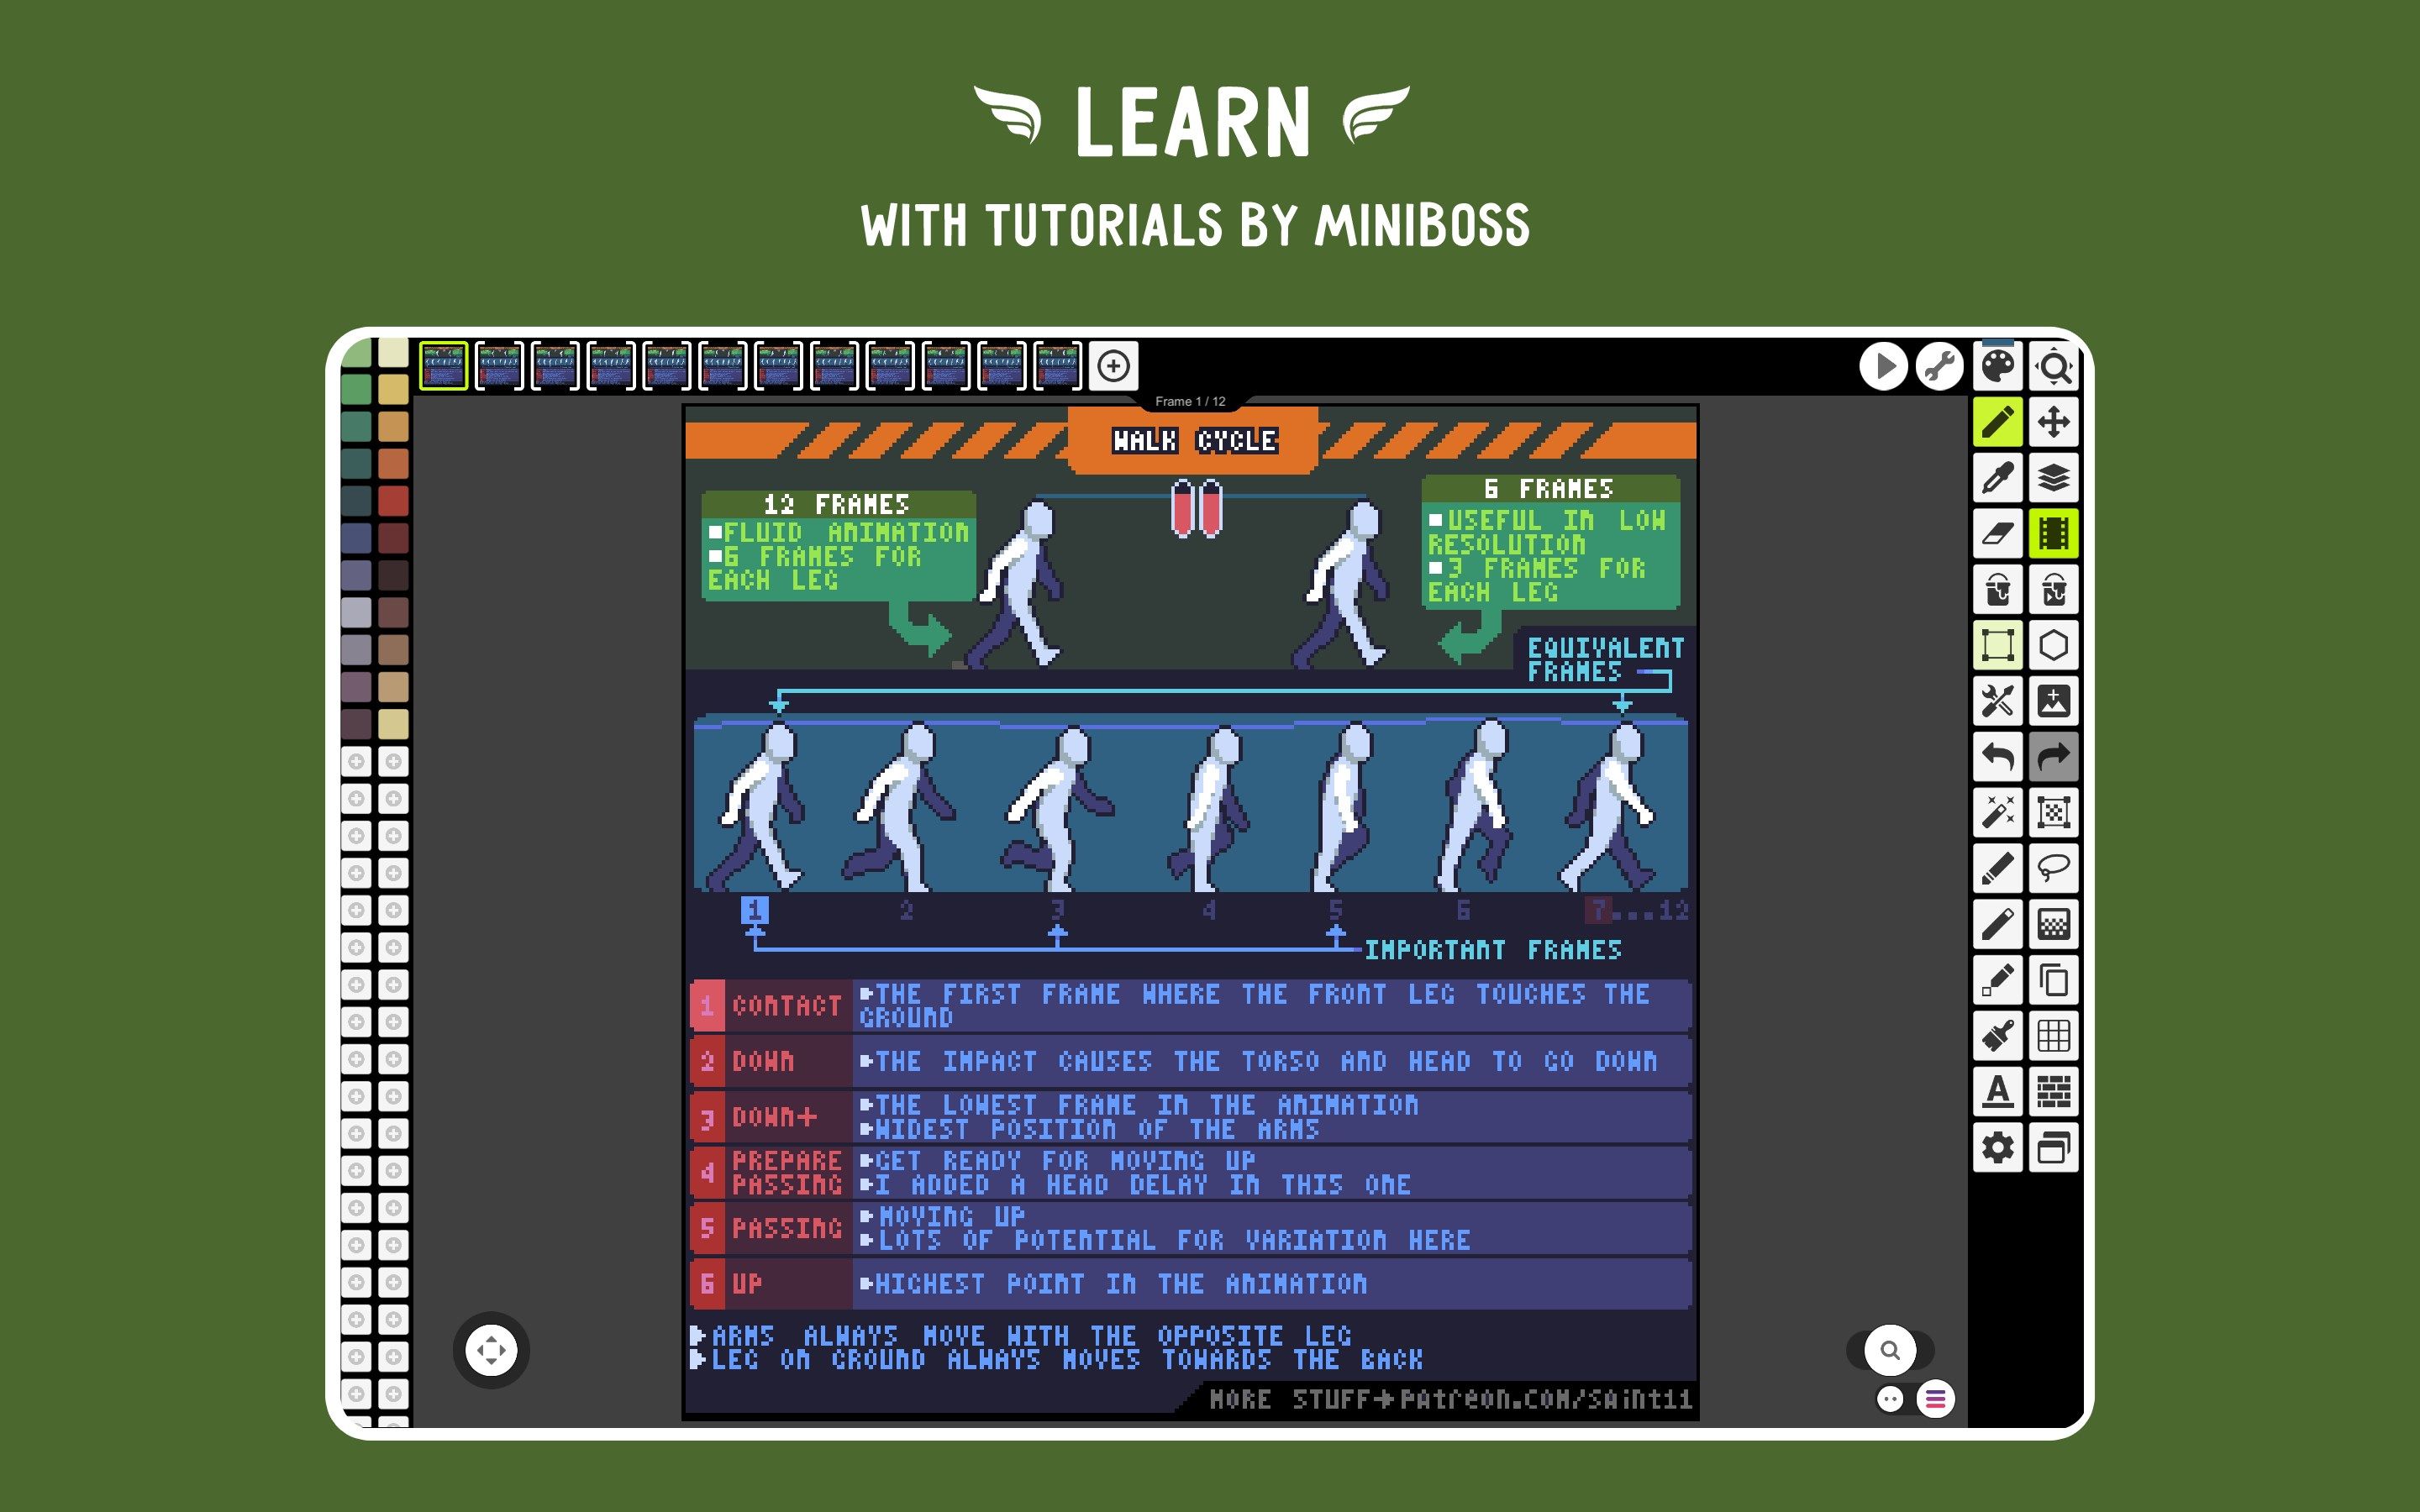 Learn with tutorials included